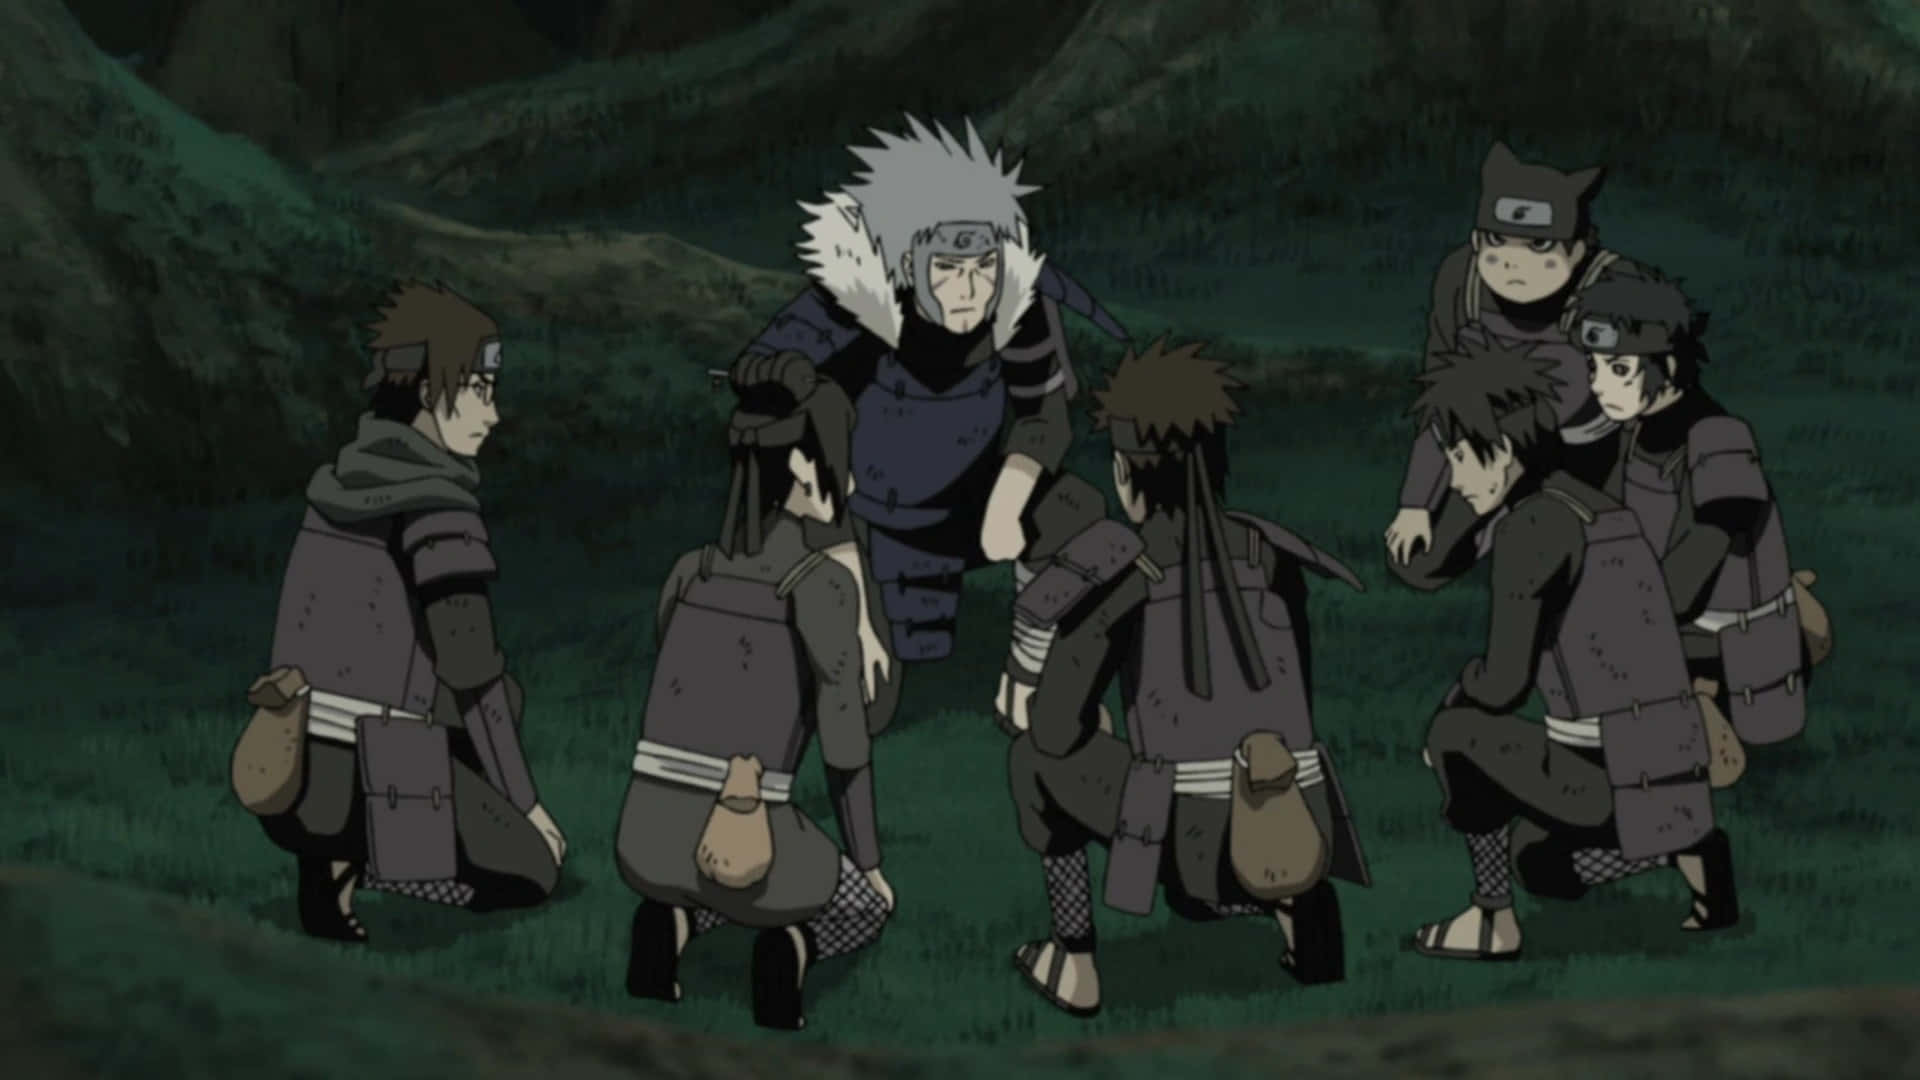 Tobirama Is Always Been The Best Hokage In Whole Naruto Series: Here's Why?